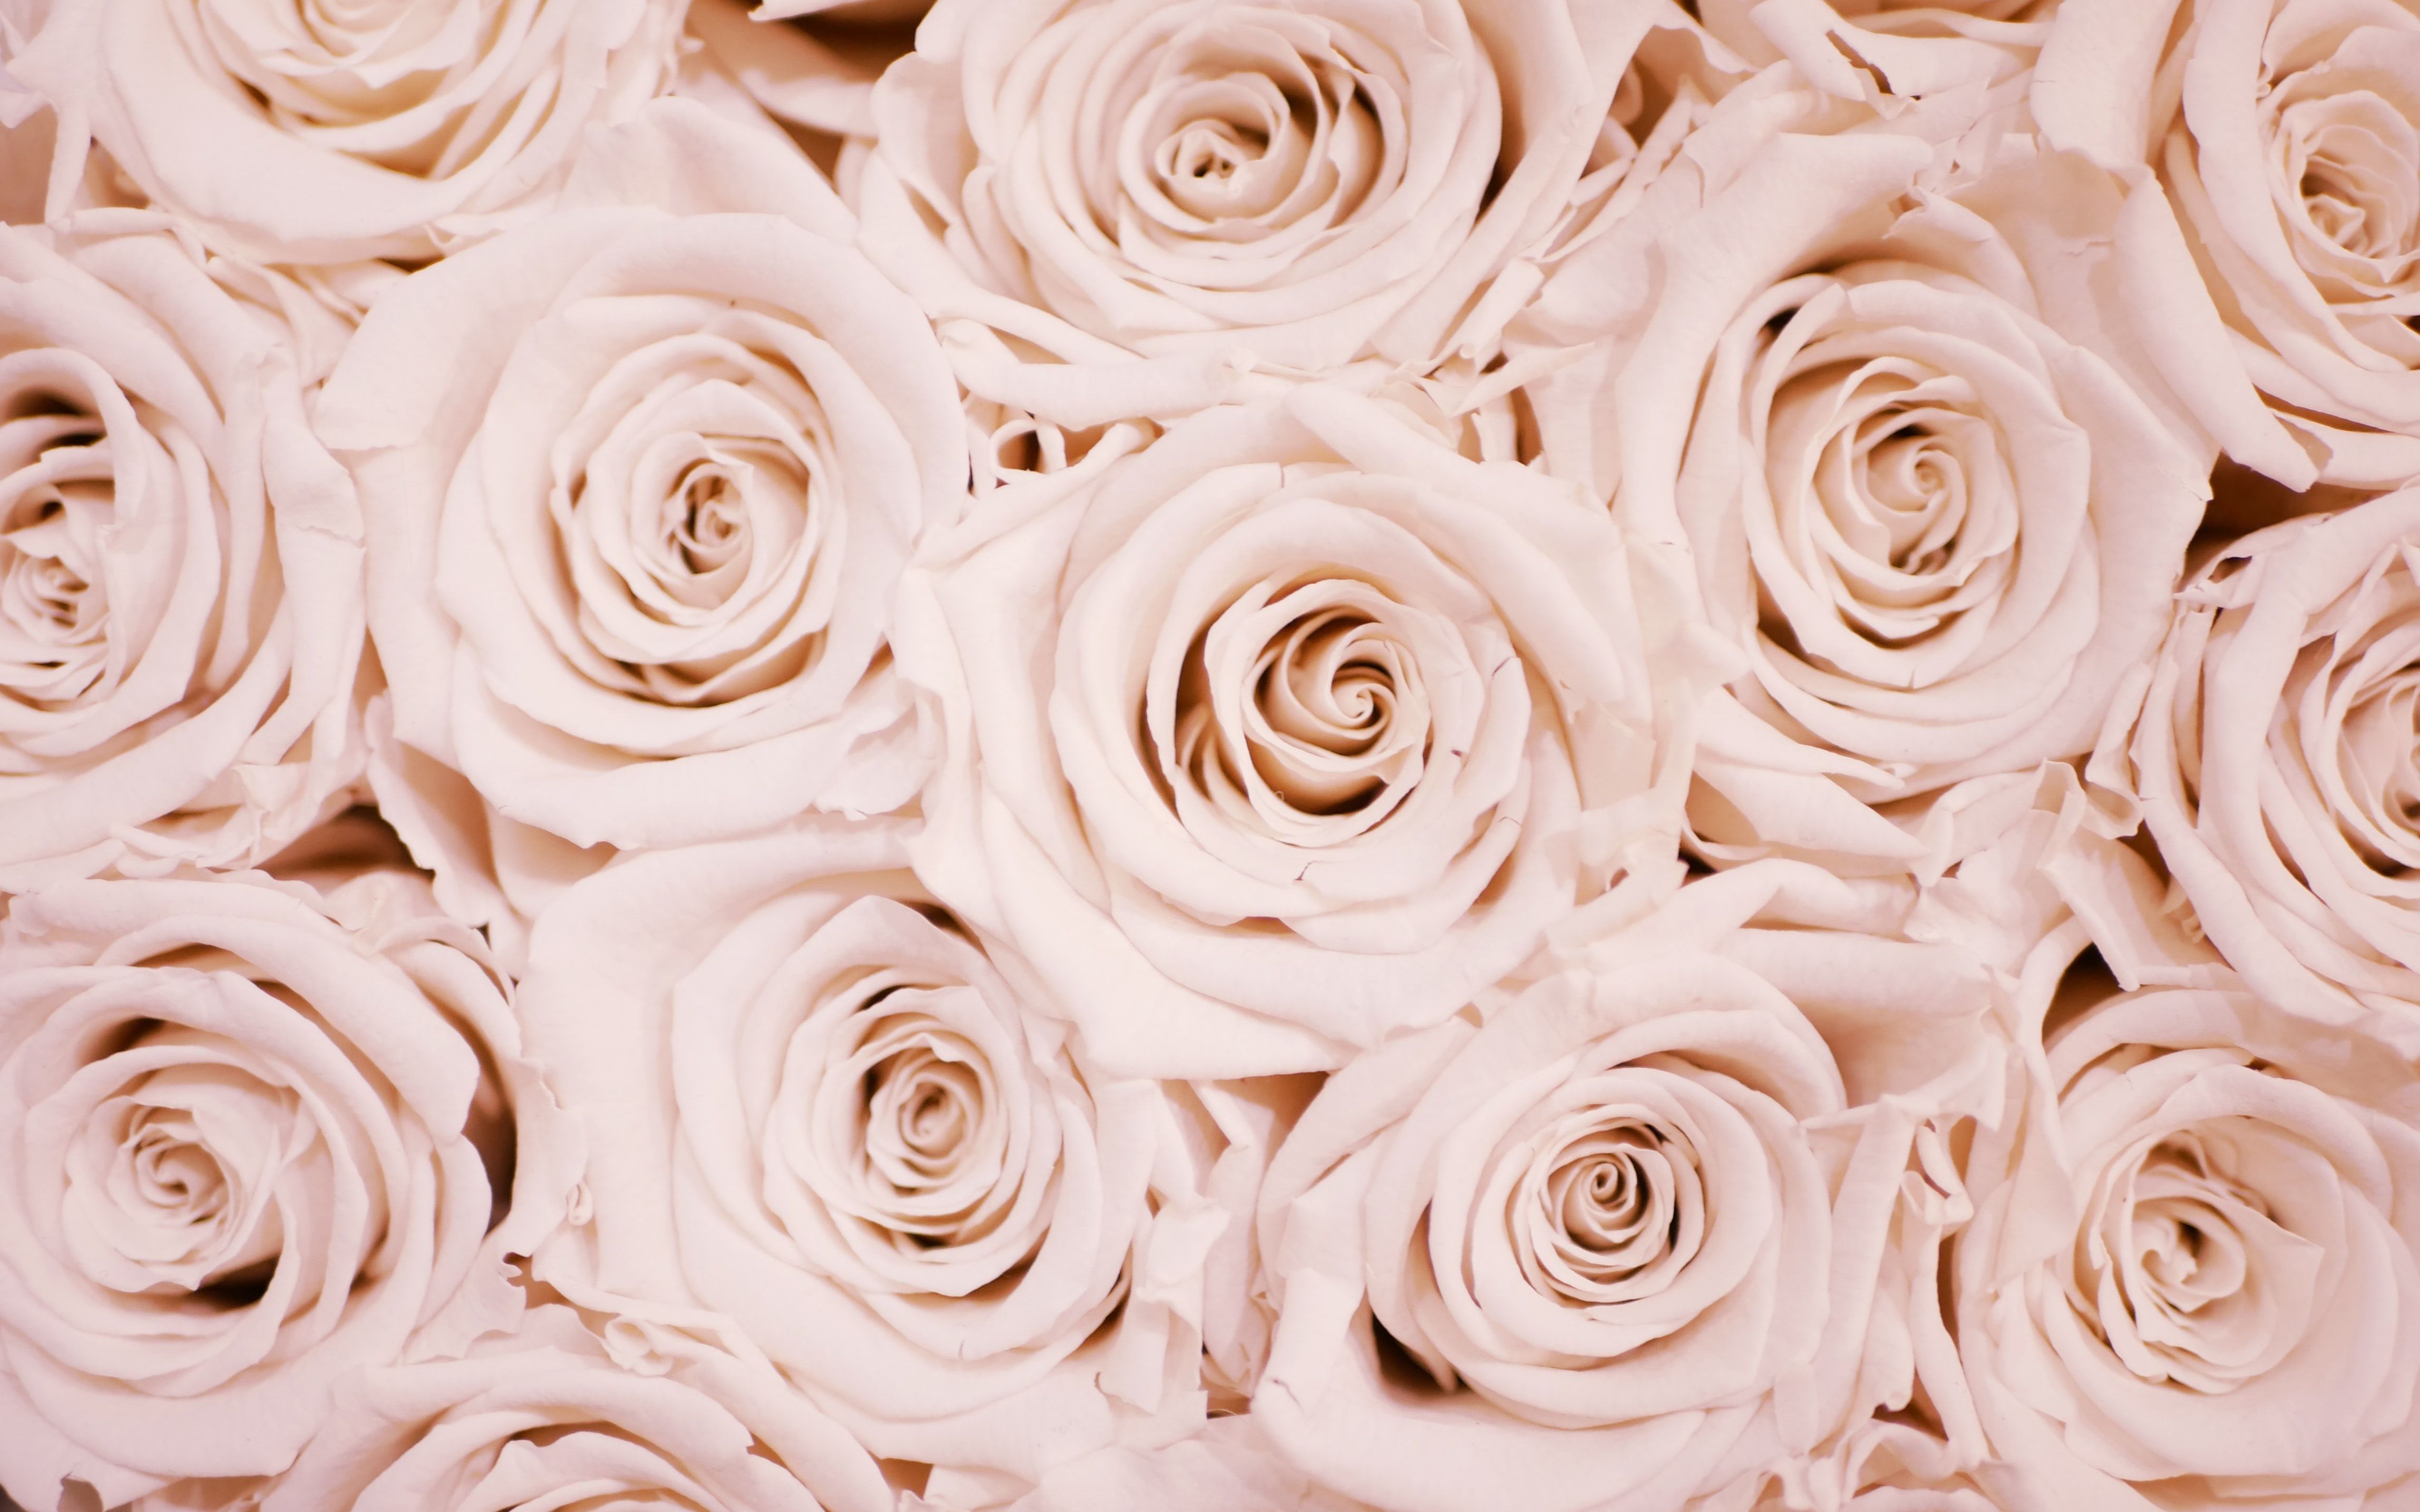 A close up of a bouquet of pale pink roses. - Rose gold